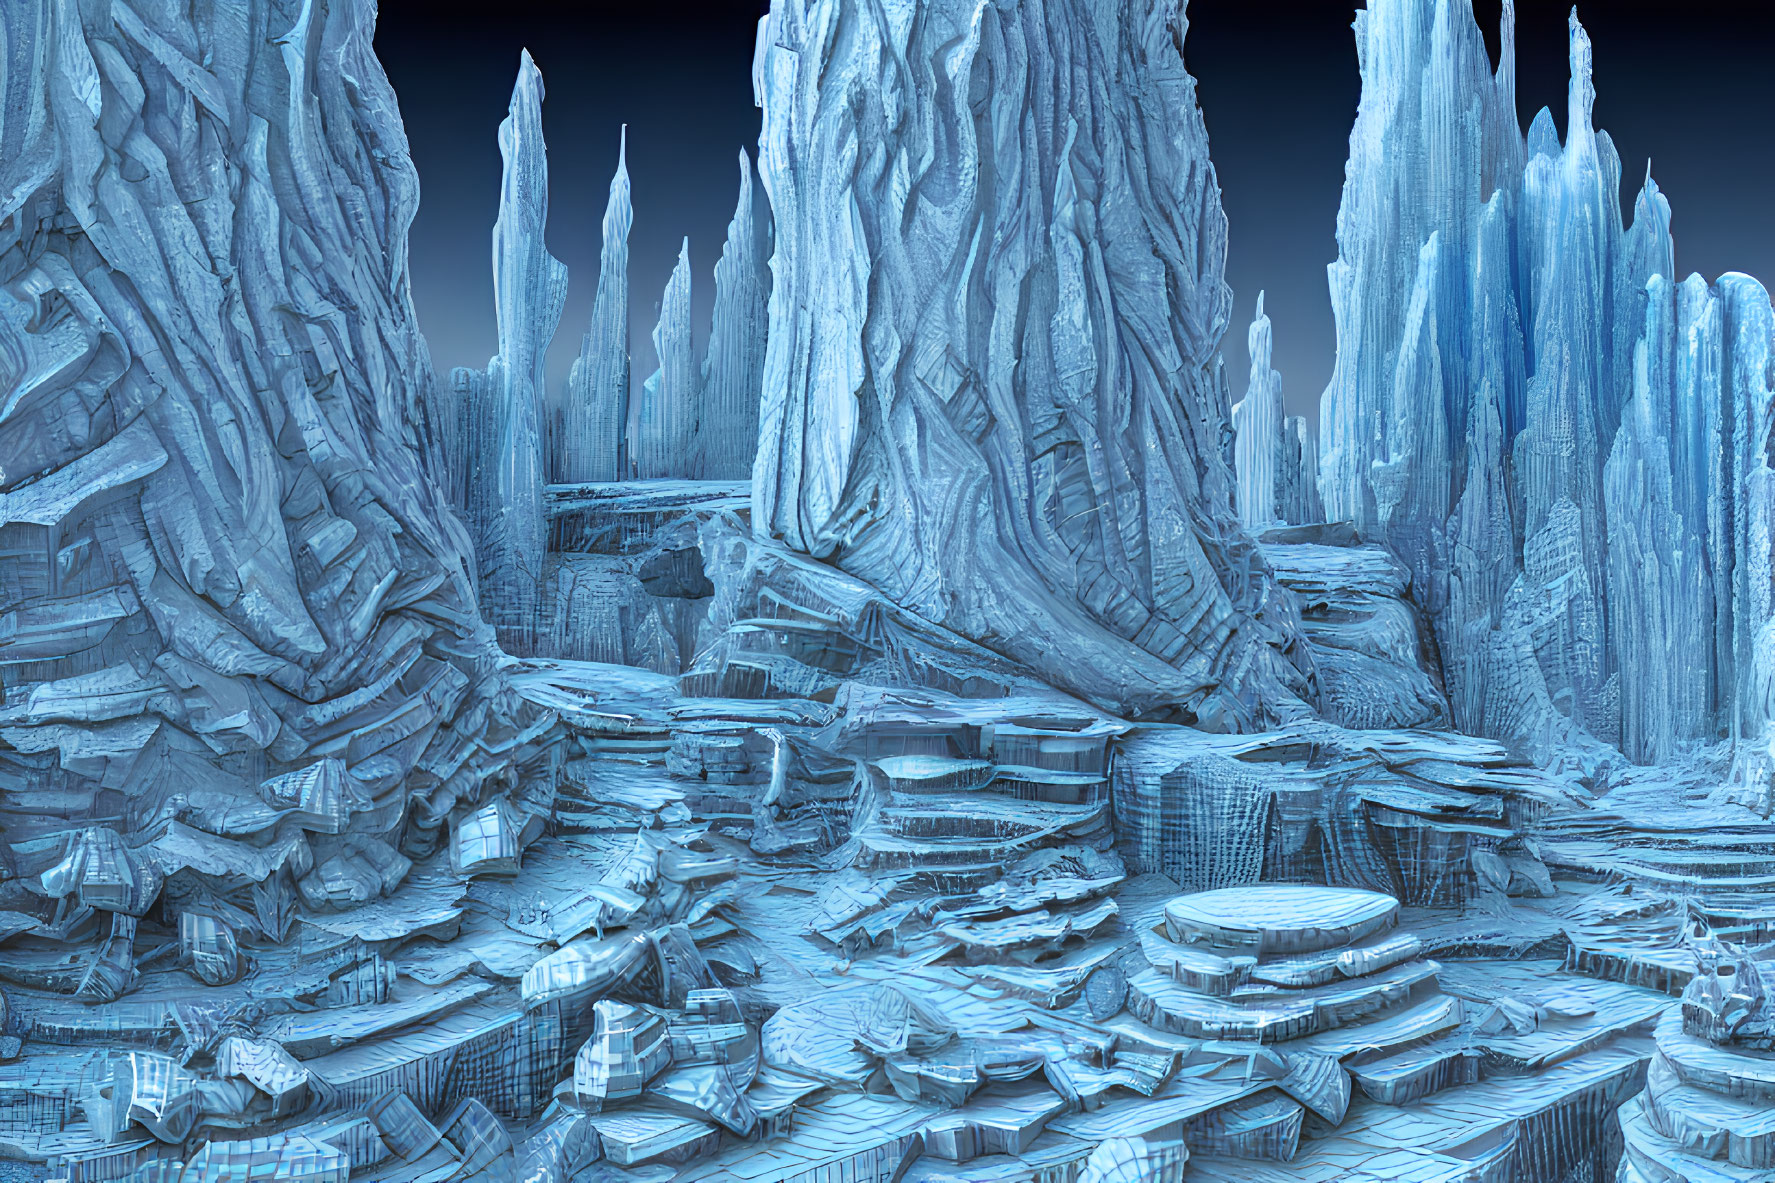 Surreal digital artwork: Icy landscape with towering ice formations